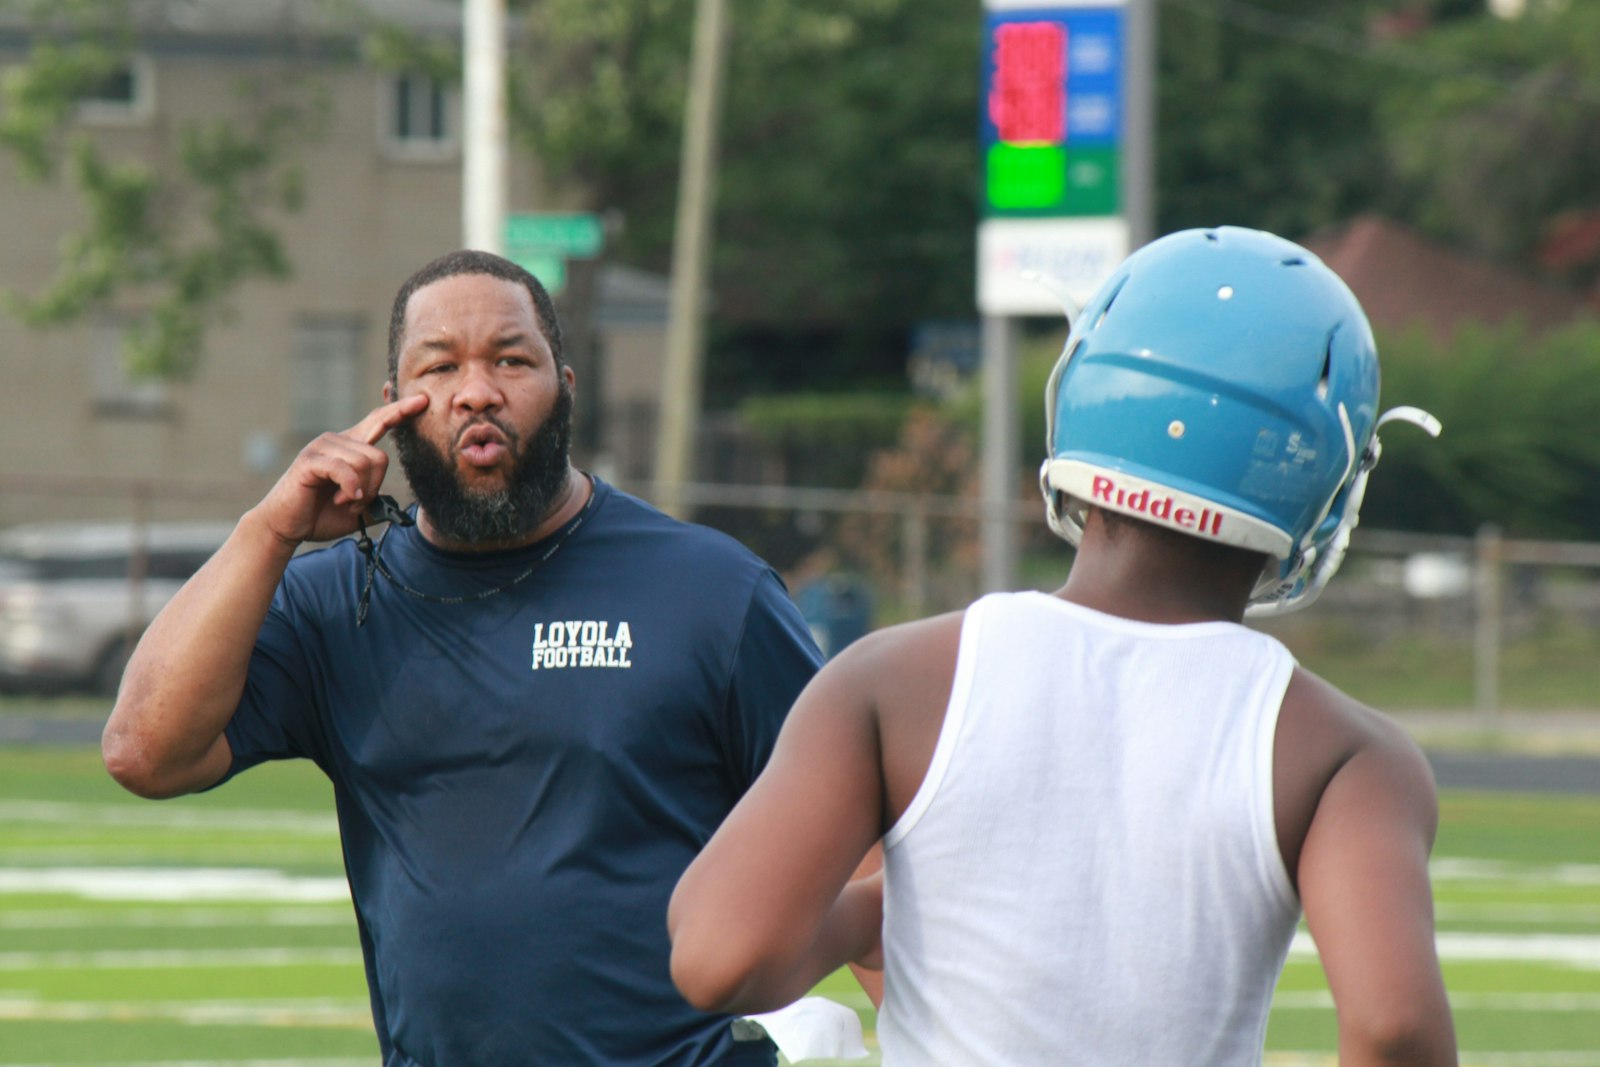 With prior coaching stops as varied as Southfield Bradford Academy charter school, Lawrence Tech University and the Detroit Ravens semi-pro team, coach Terrance Sims takes over the program at Loyola High School this season.